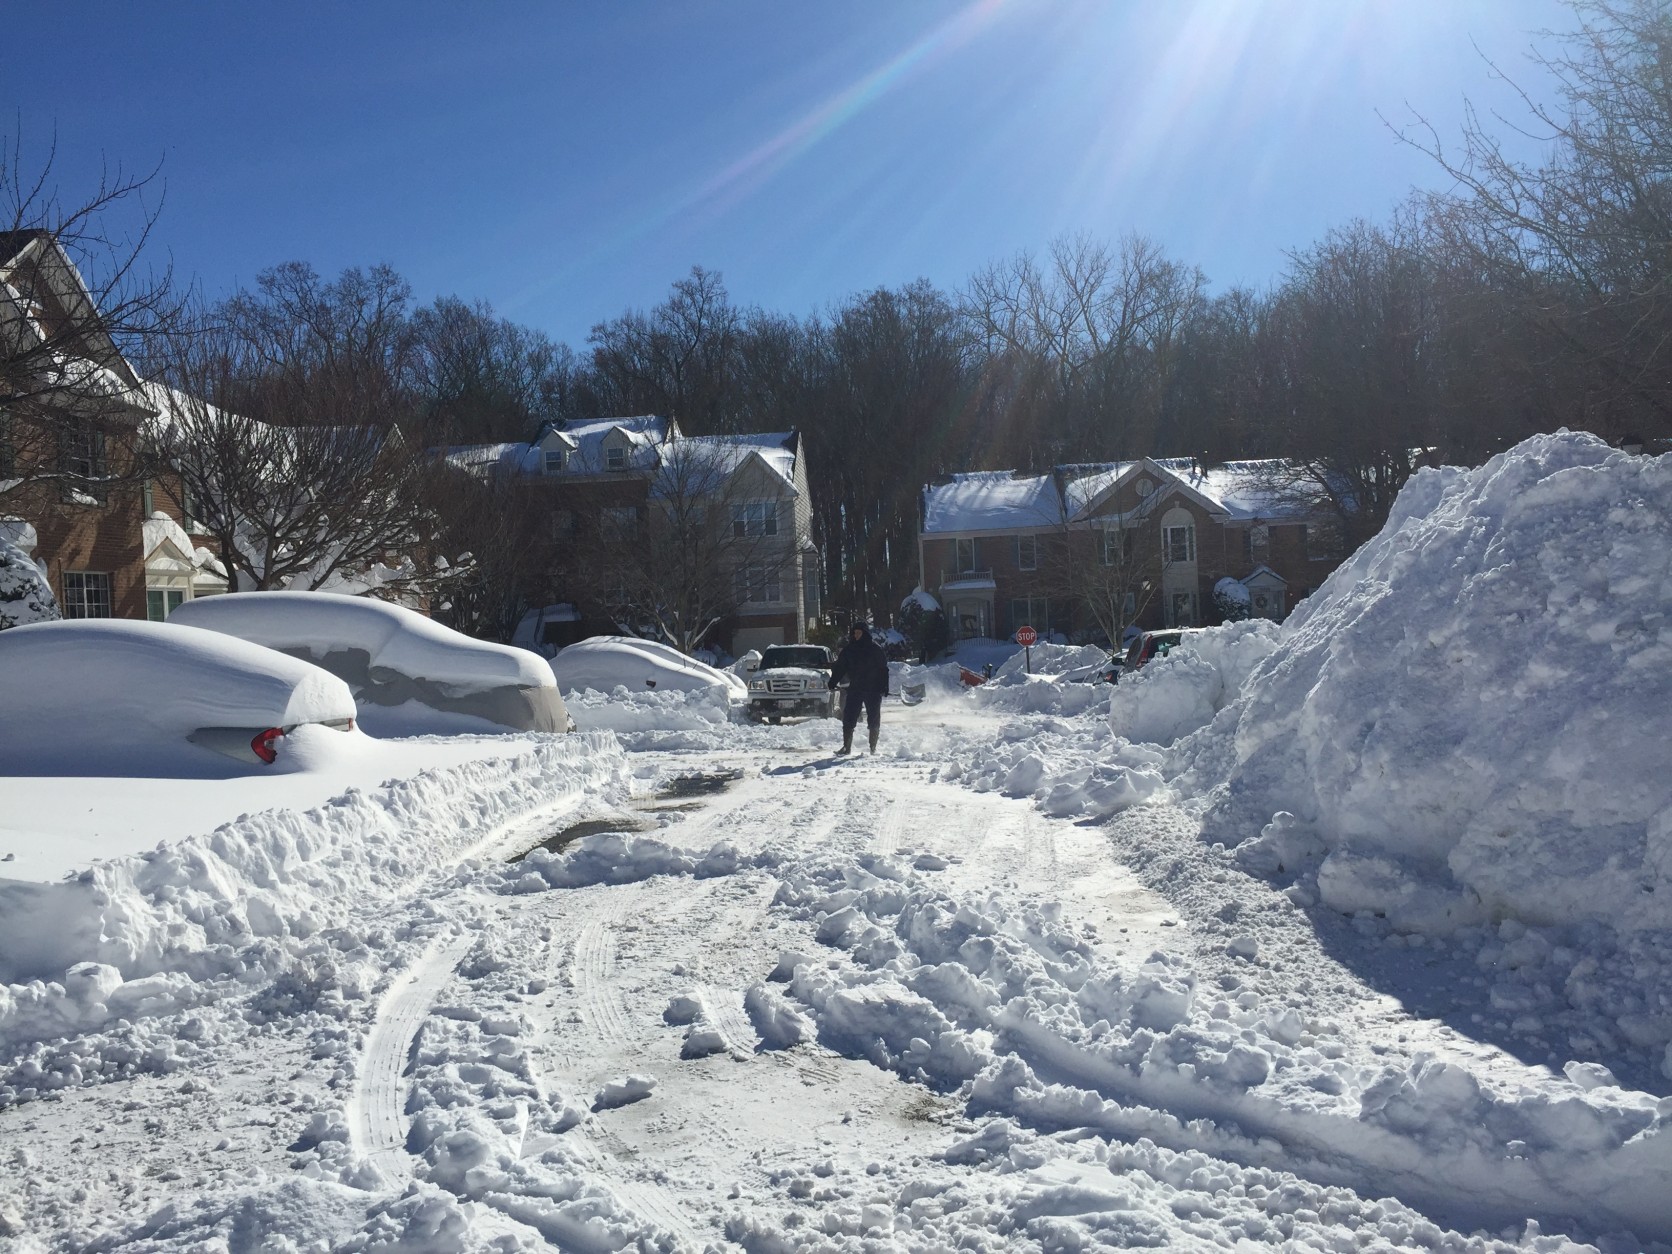 Mounds of snow are piled up in Germantown, Maryland as folks dig out.  (WTOP/Mike Jakaitis)